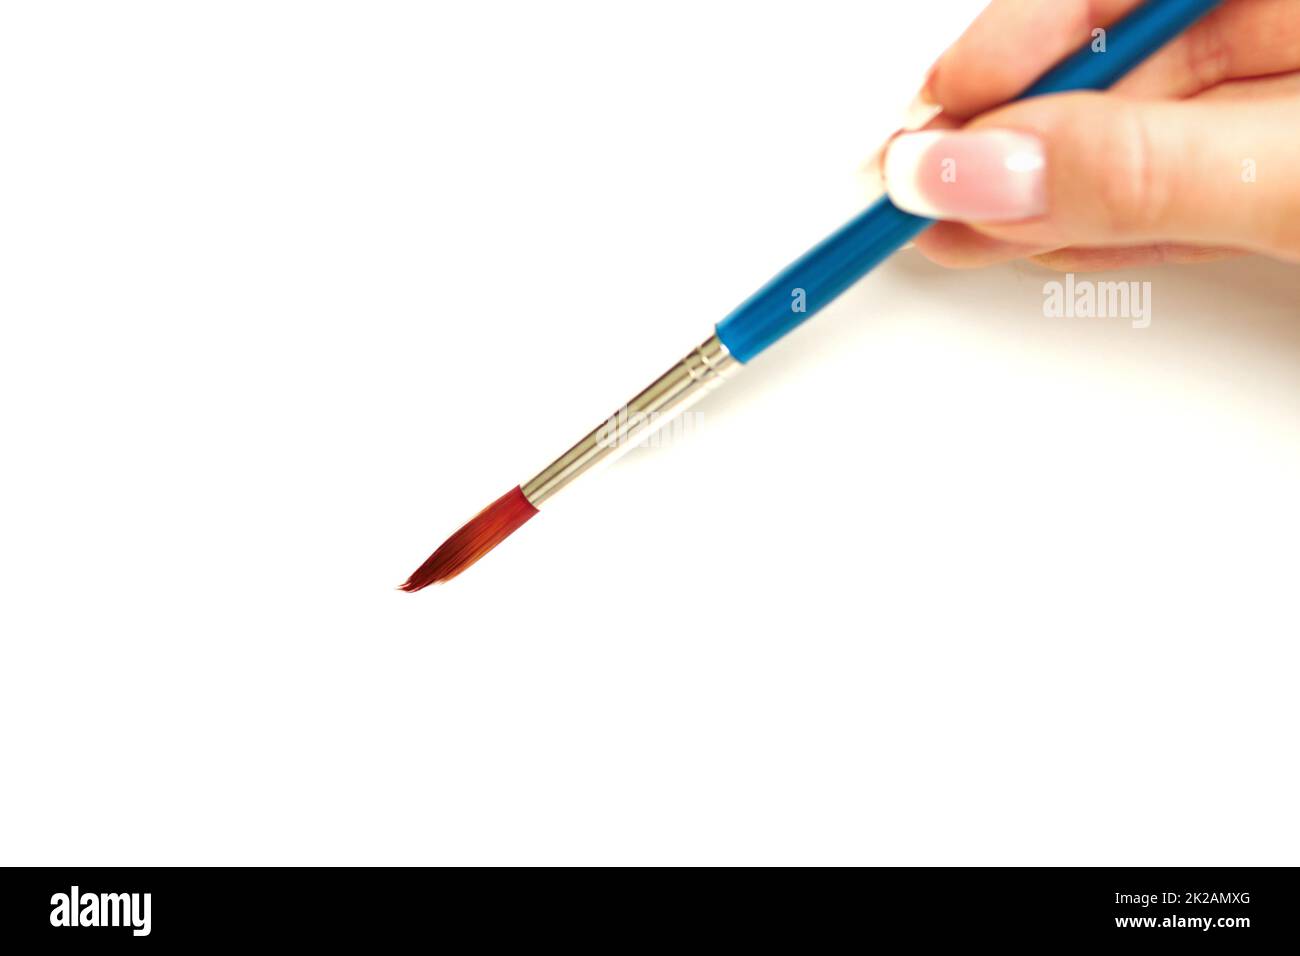 An artists delight. Close up shot of a female hand holding a paintbrush - white background. Stock Photo